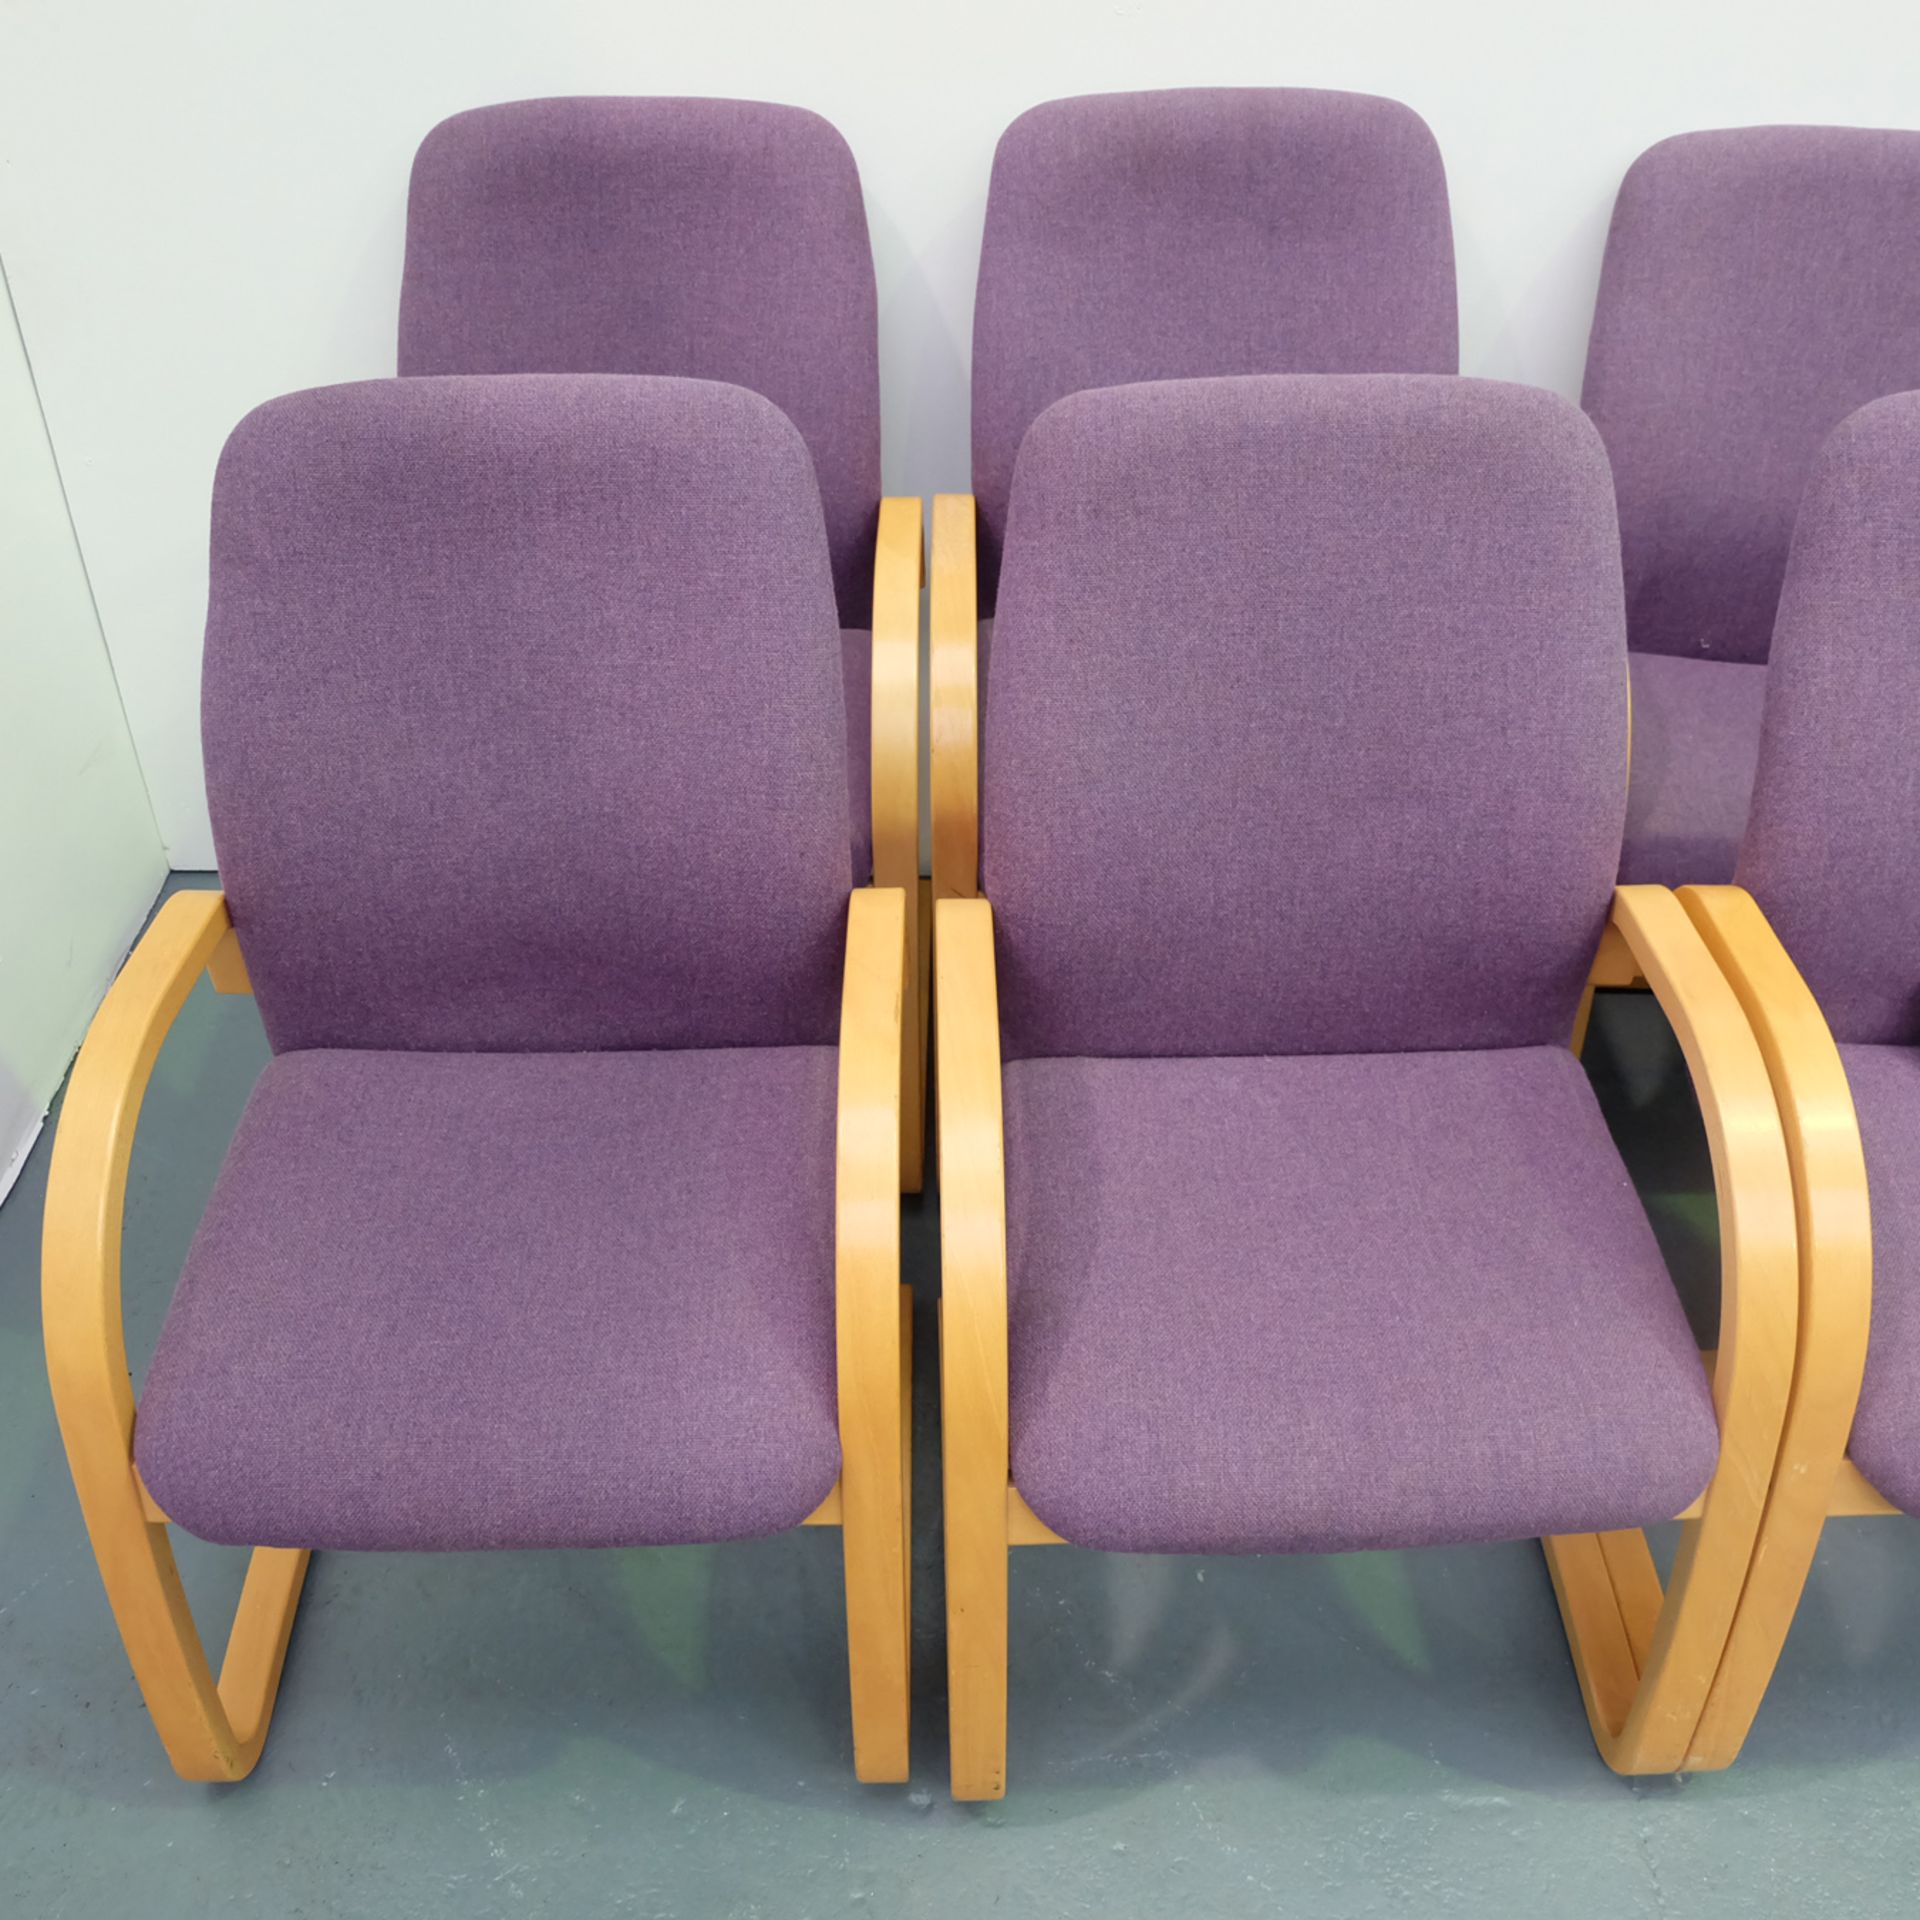 9 x Conference Chairs. - Image 5 of 5